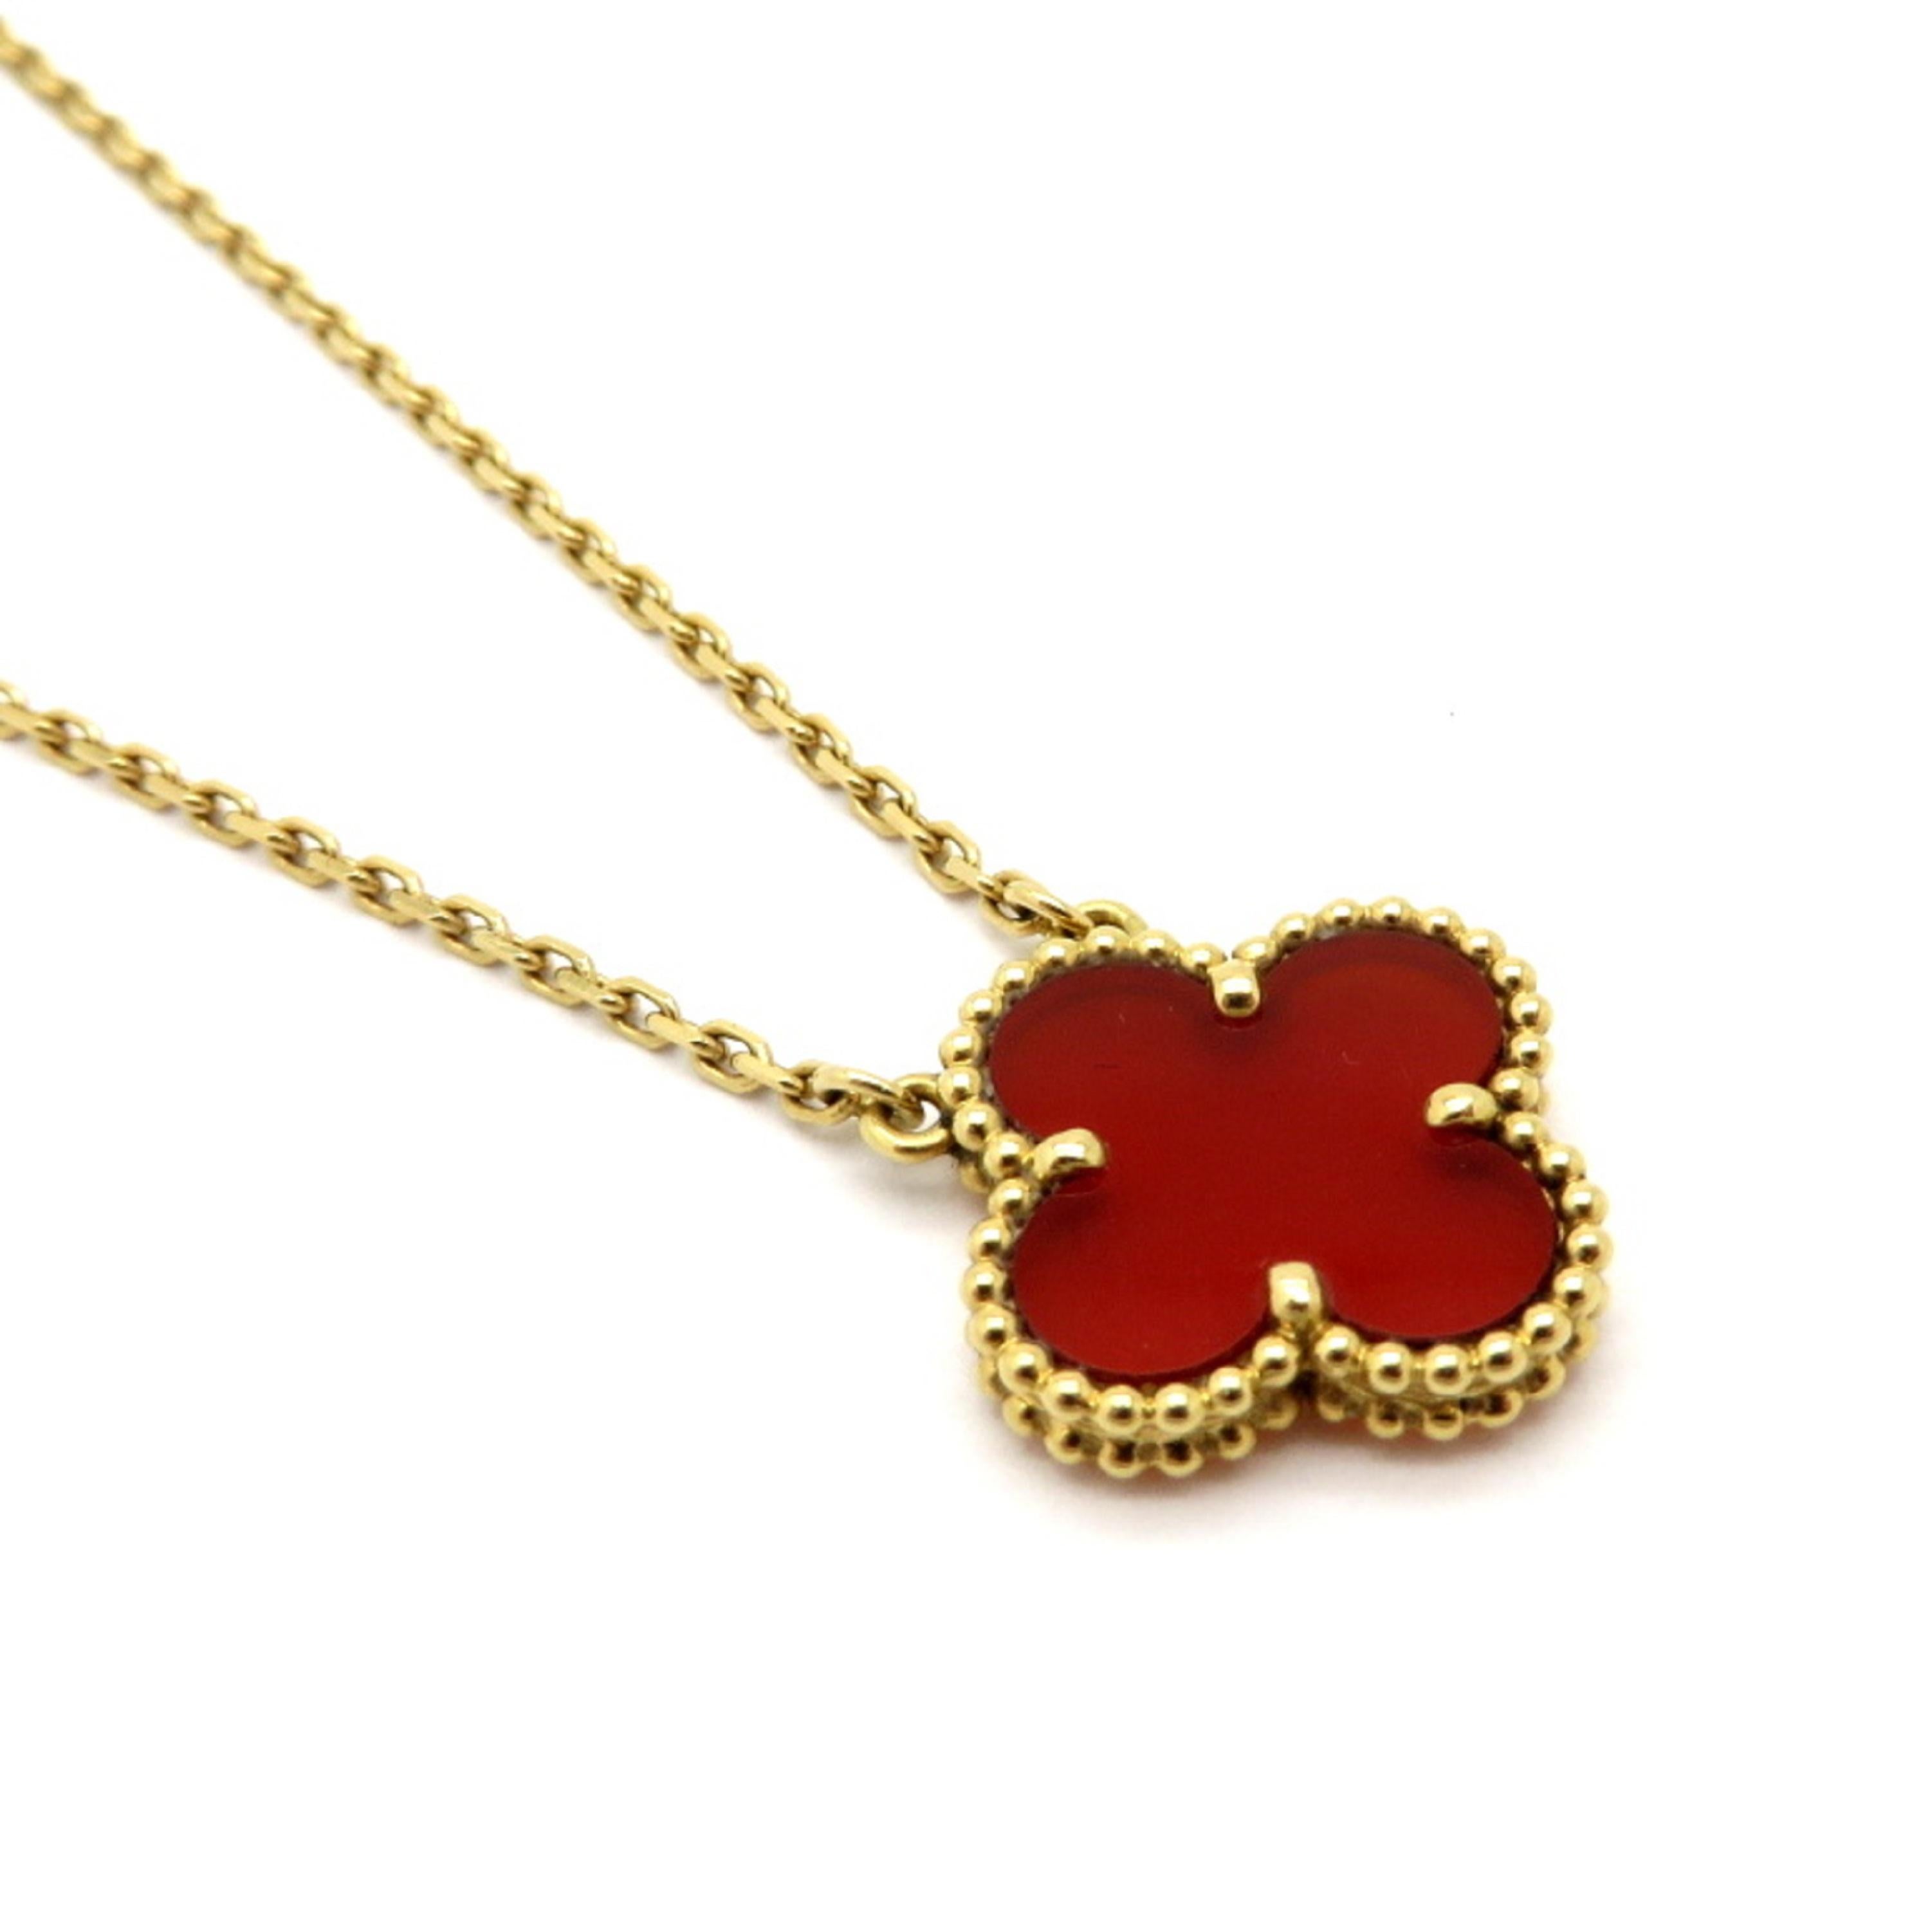 For sale is a designer Van Cleef & Arpels Alhambra Carnelian 18K Yellow Gold Necklace! Model reference number JE299091. The chain measures 16 ½” inches long. It is hallmarked 750 and secured by a lobster claw clasp. A small plaque on the chain is